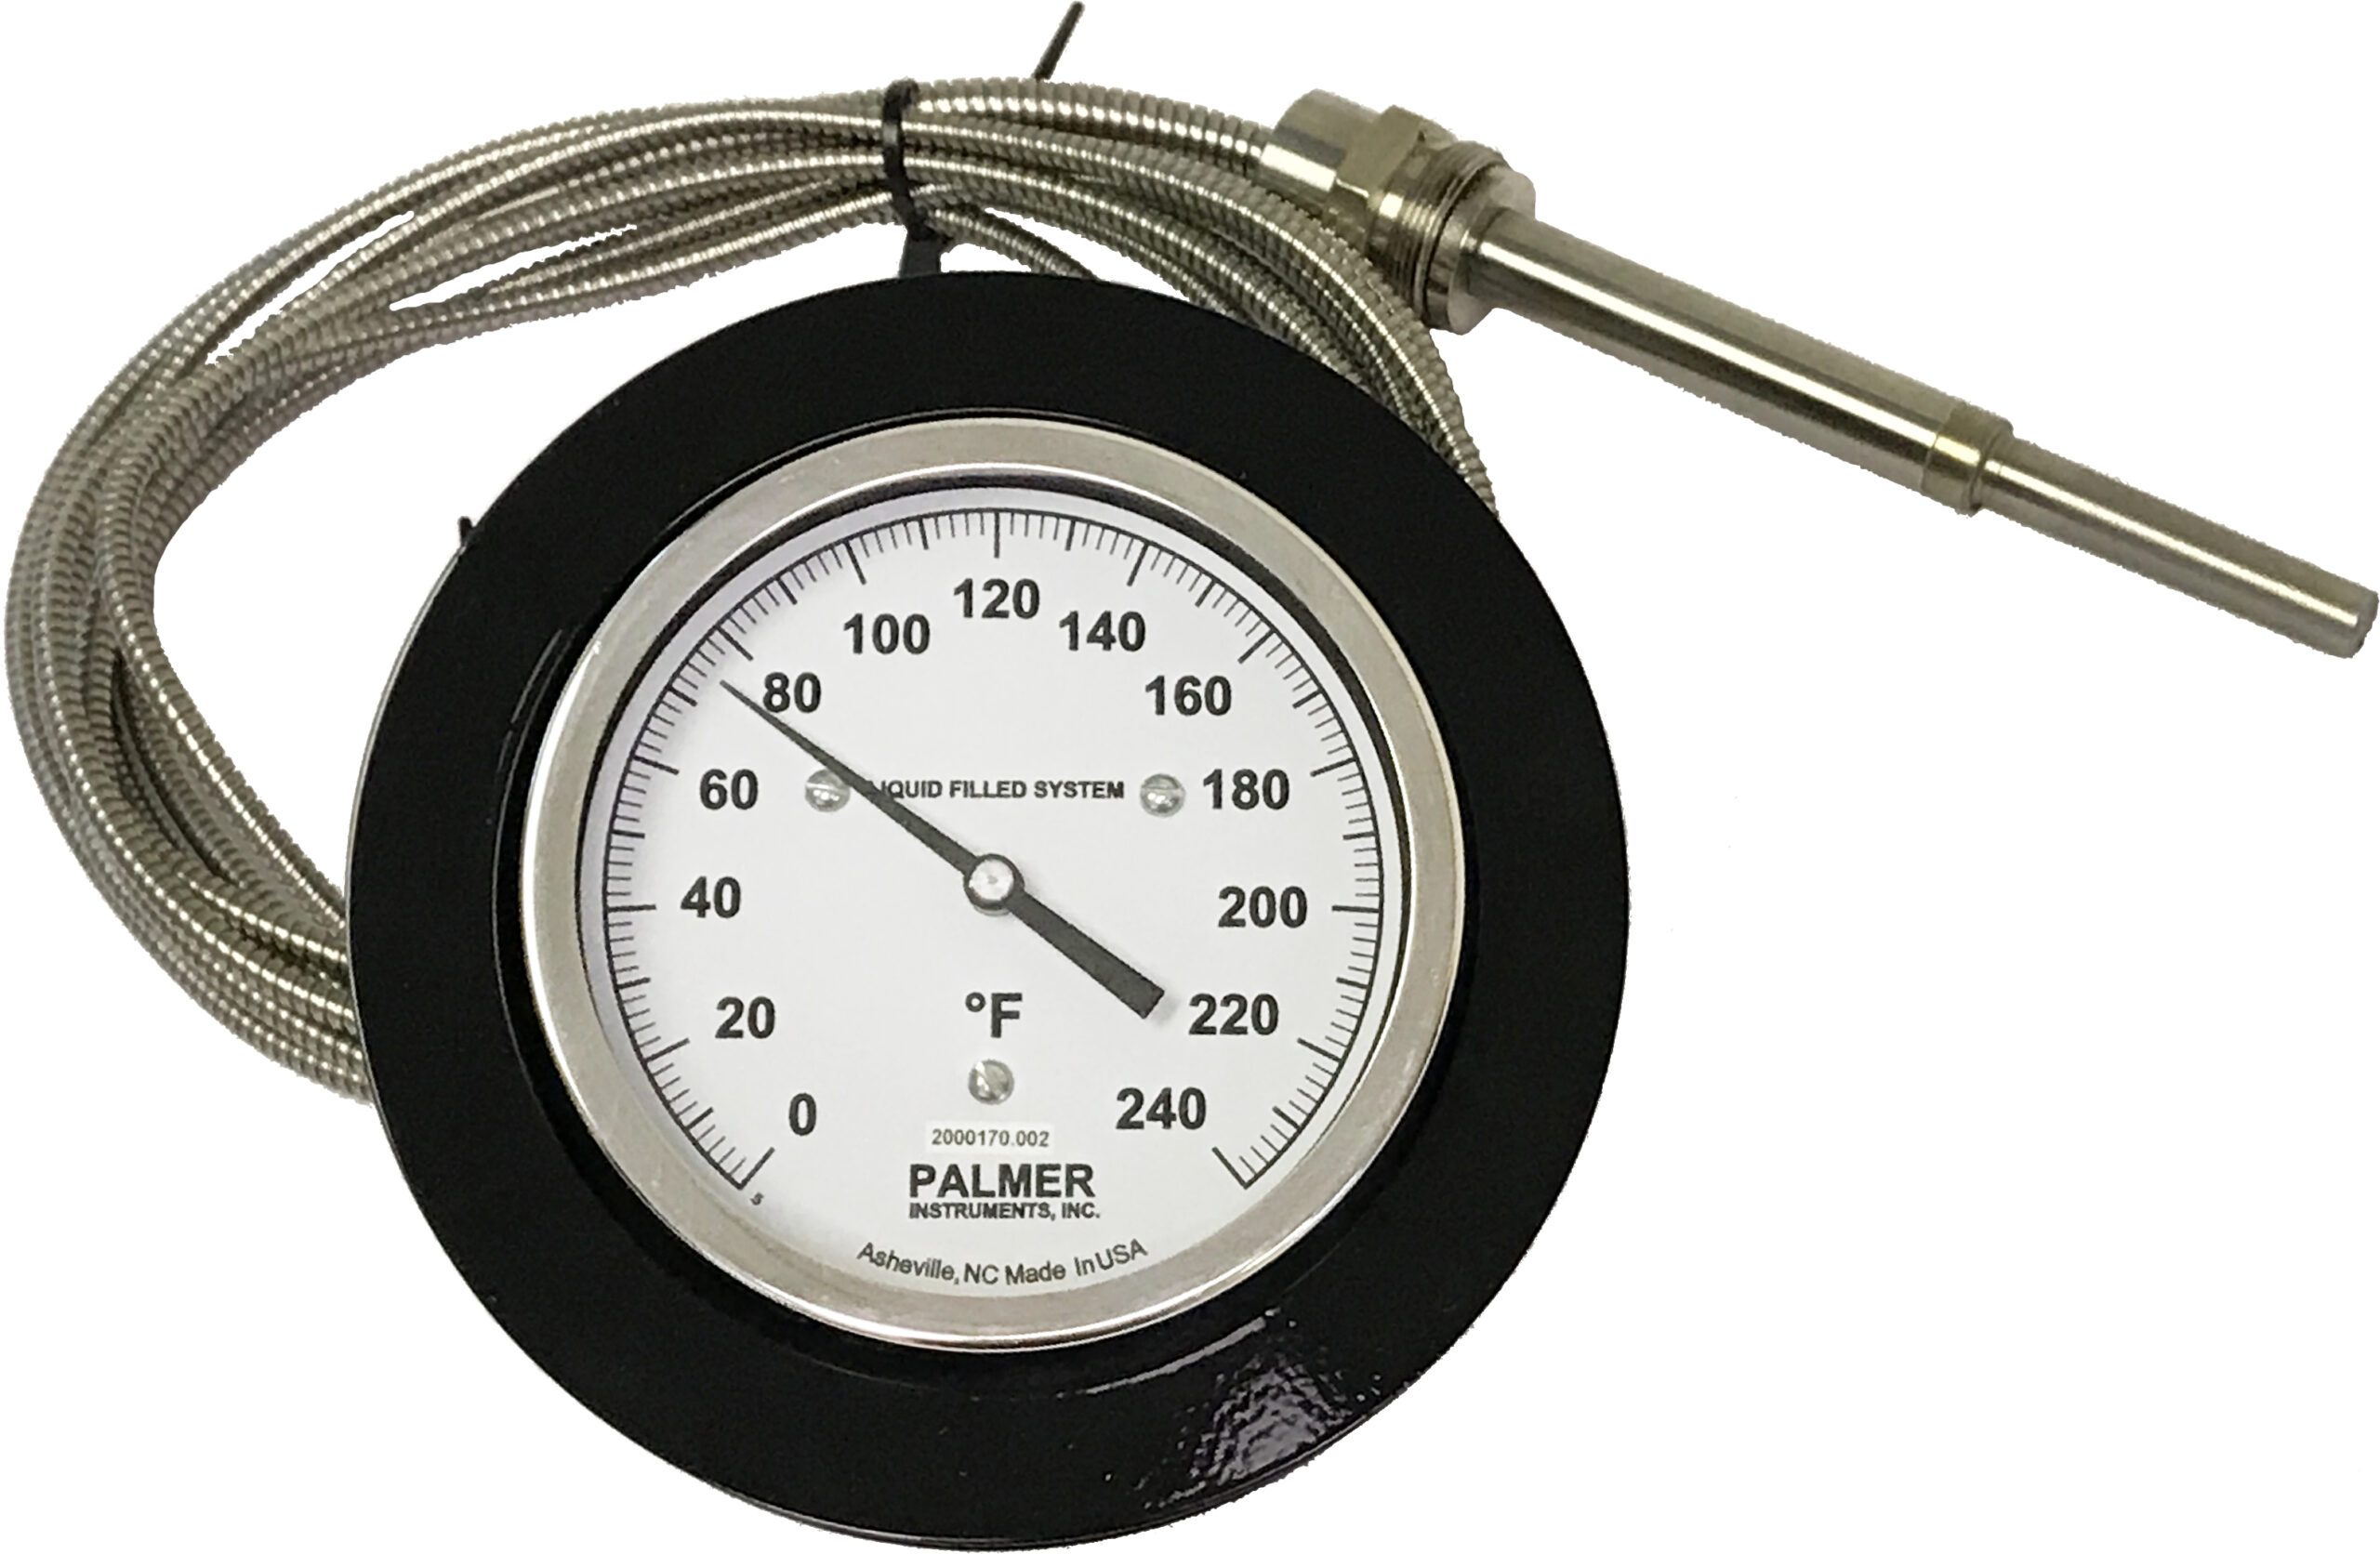 DIAL THERMOMETERS - 1.75 / 2 DIAMETER